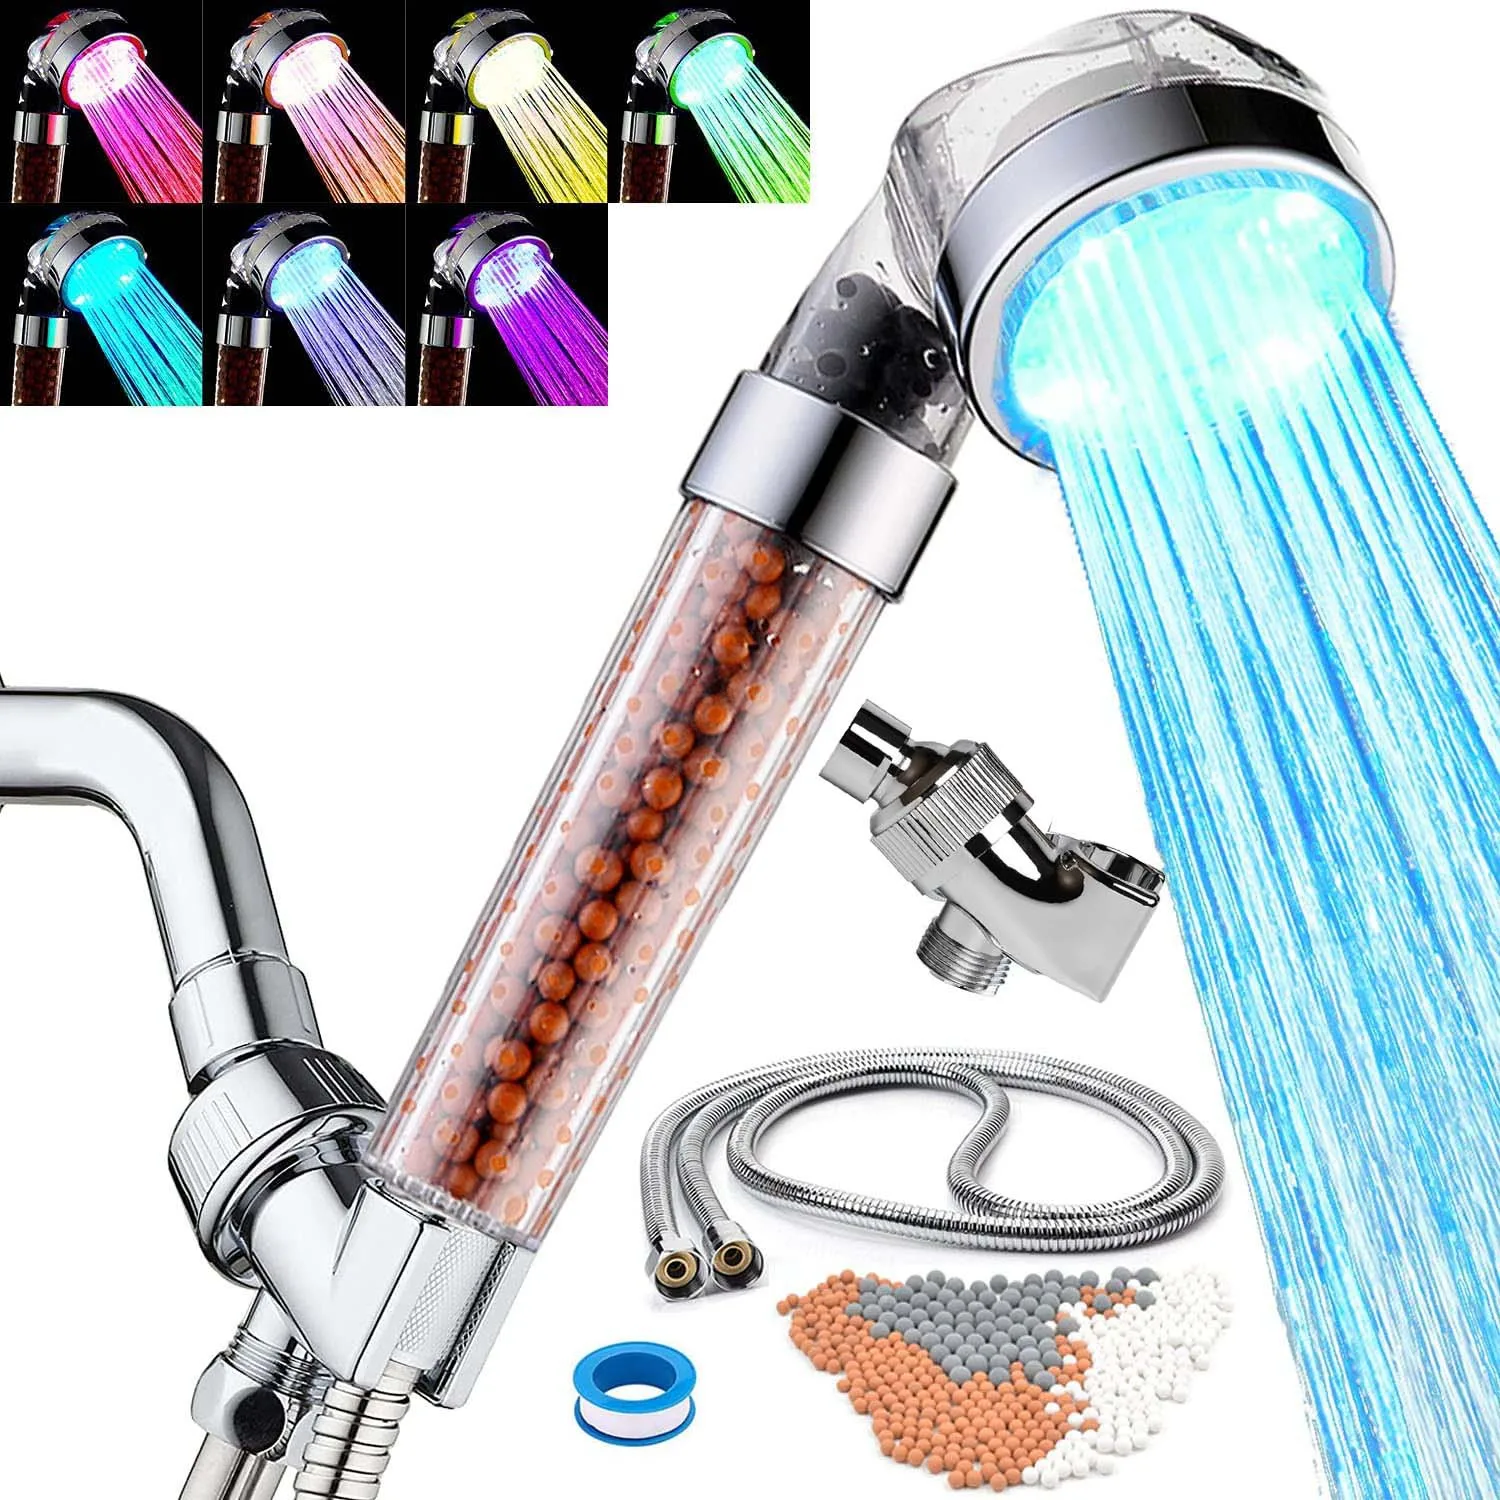 

Anion Colorful LED Shower SPA Shower Head Pressurized Water Saving Temperature Control Colorful Light Handheld Big Rain Shower